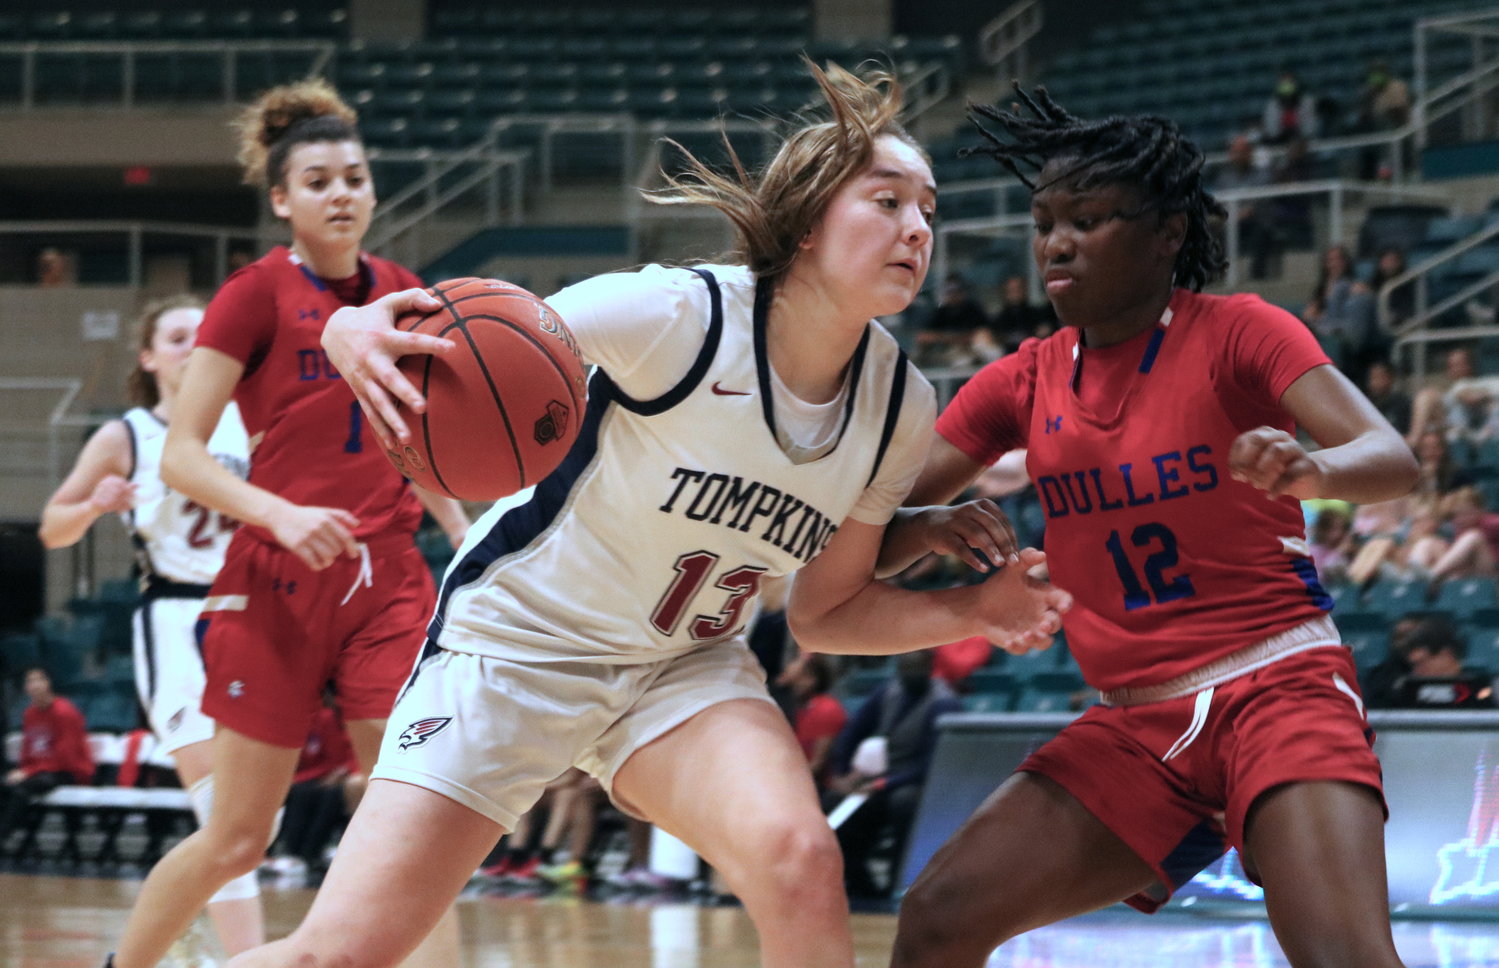 Tompkins’ Macy Spencer fights through contact during Tuesday’s Class 6A regional quarterfinal against Fort Bend Dulles at the Merrell Center.